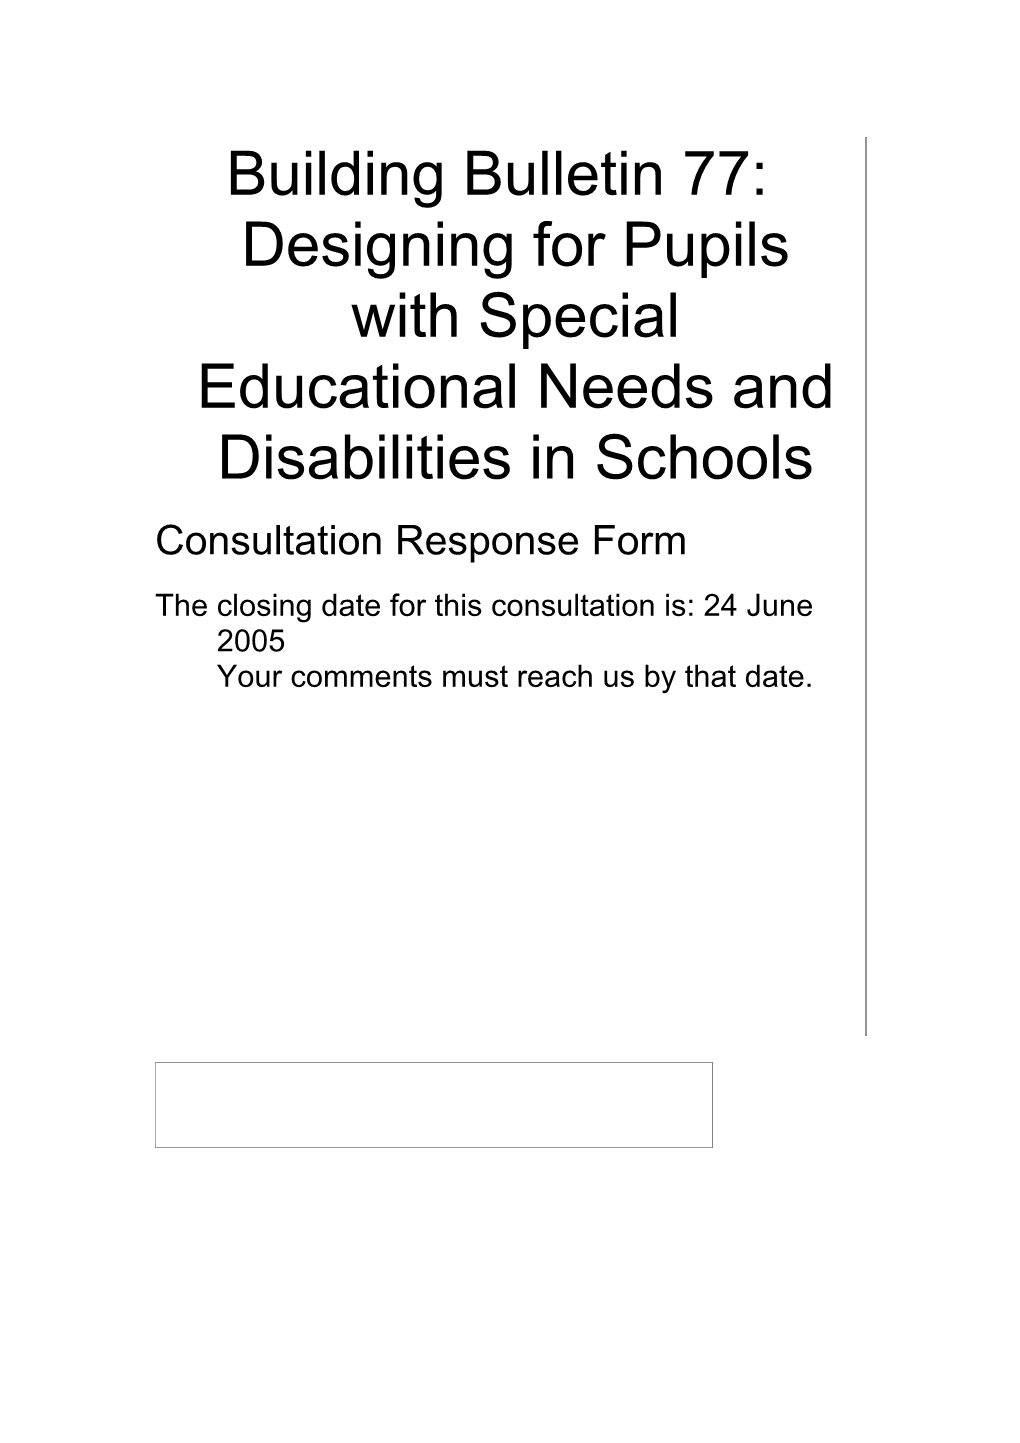 Building Bulletin 77: Designing for Pupils with Special Educational Needs and Disabilities